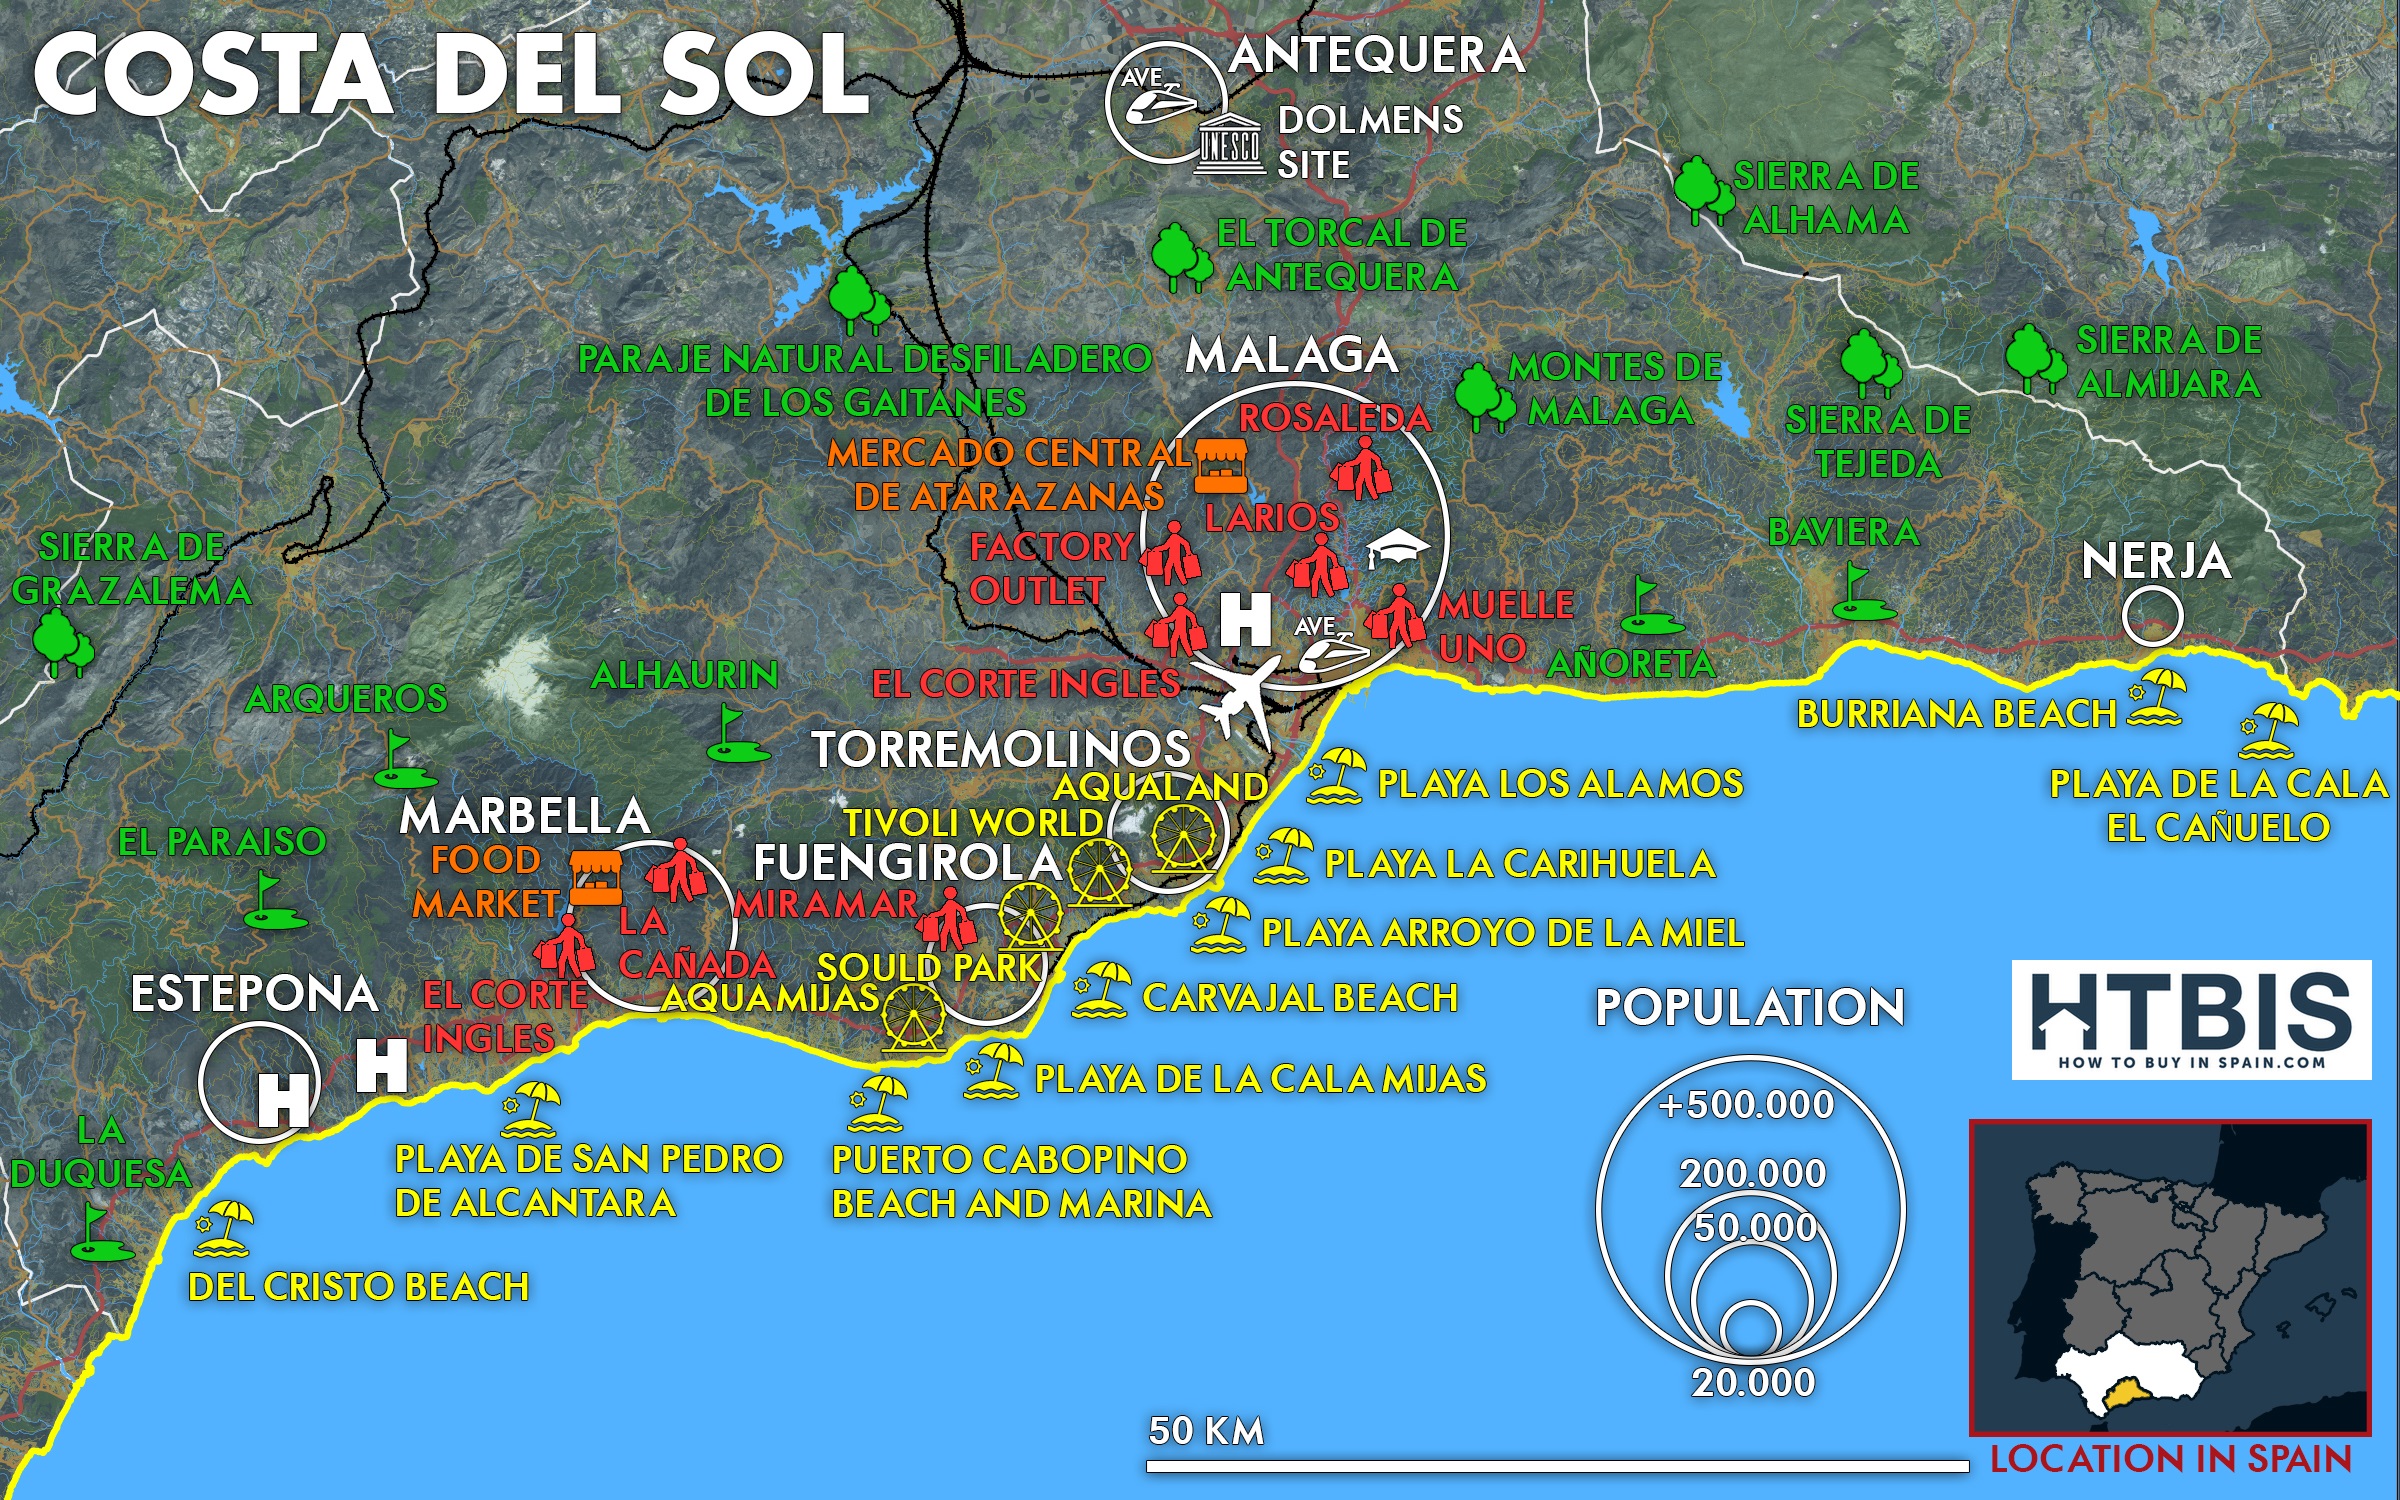 Map with all the useful information on the Costa del Sol